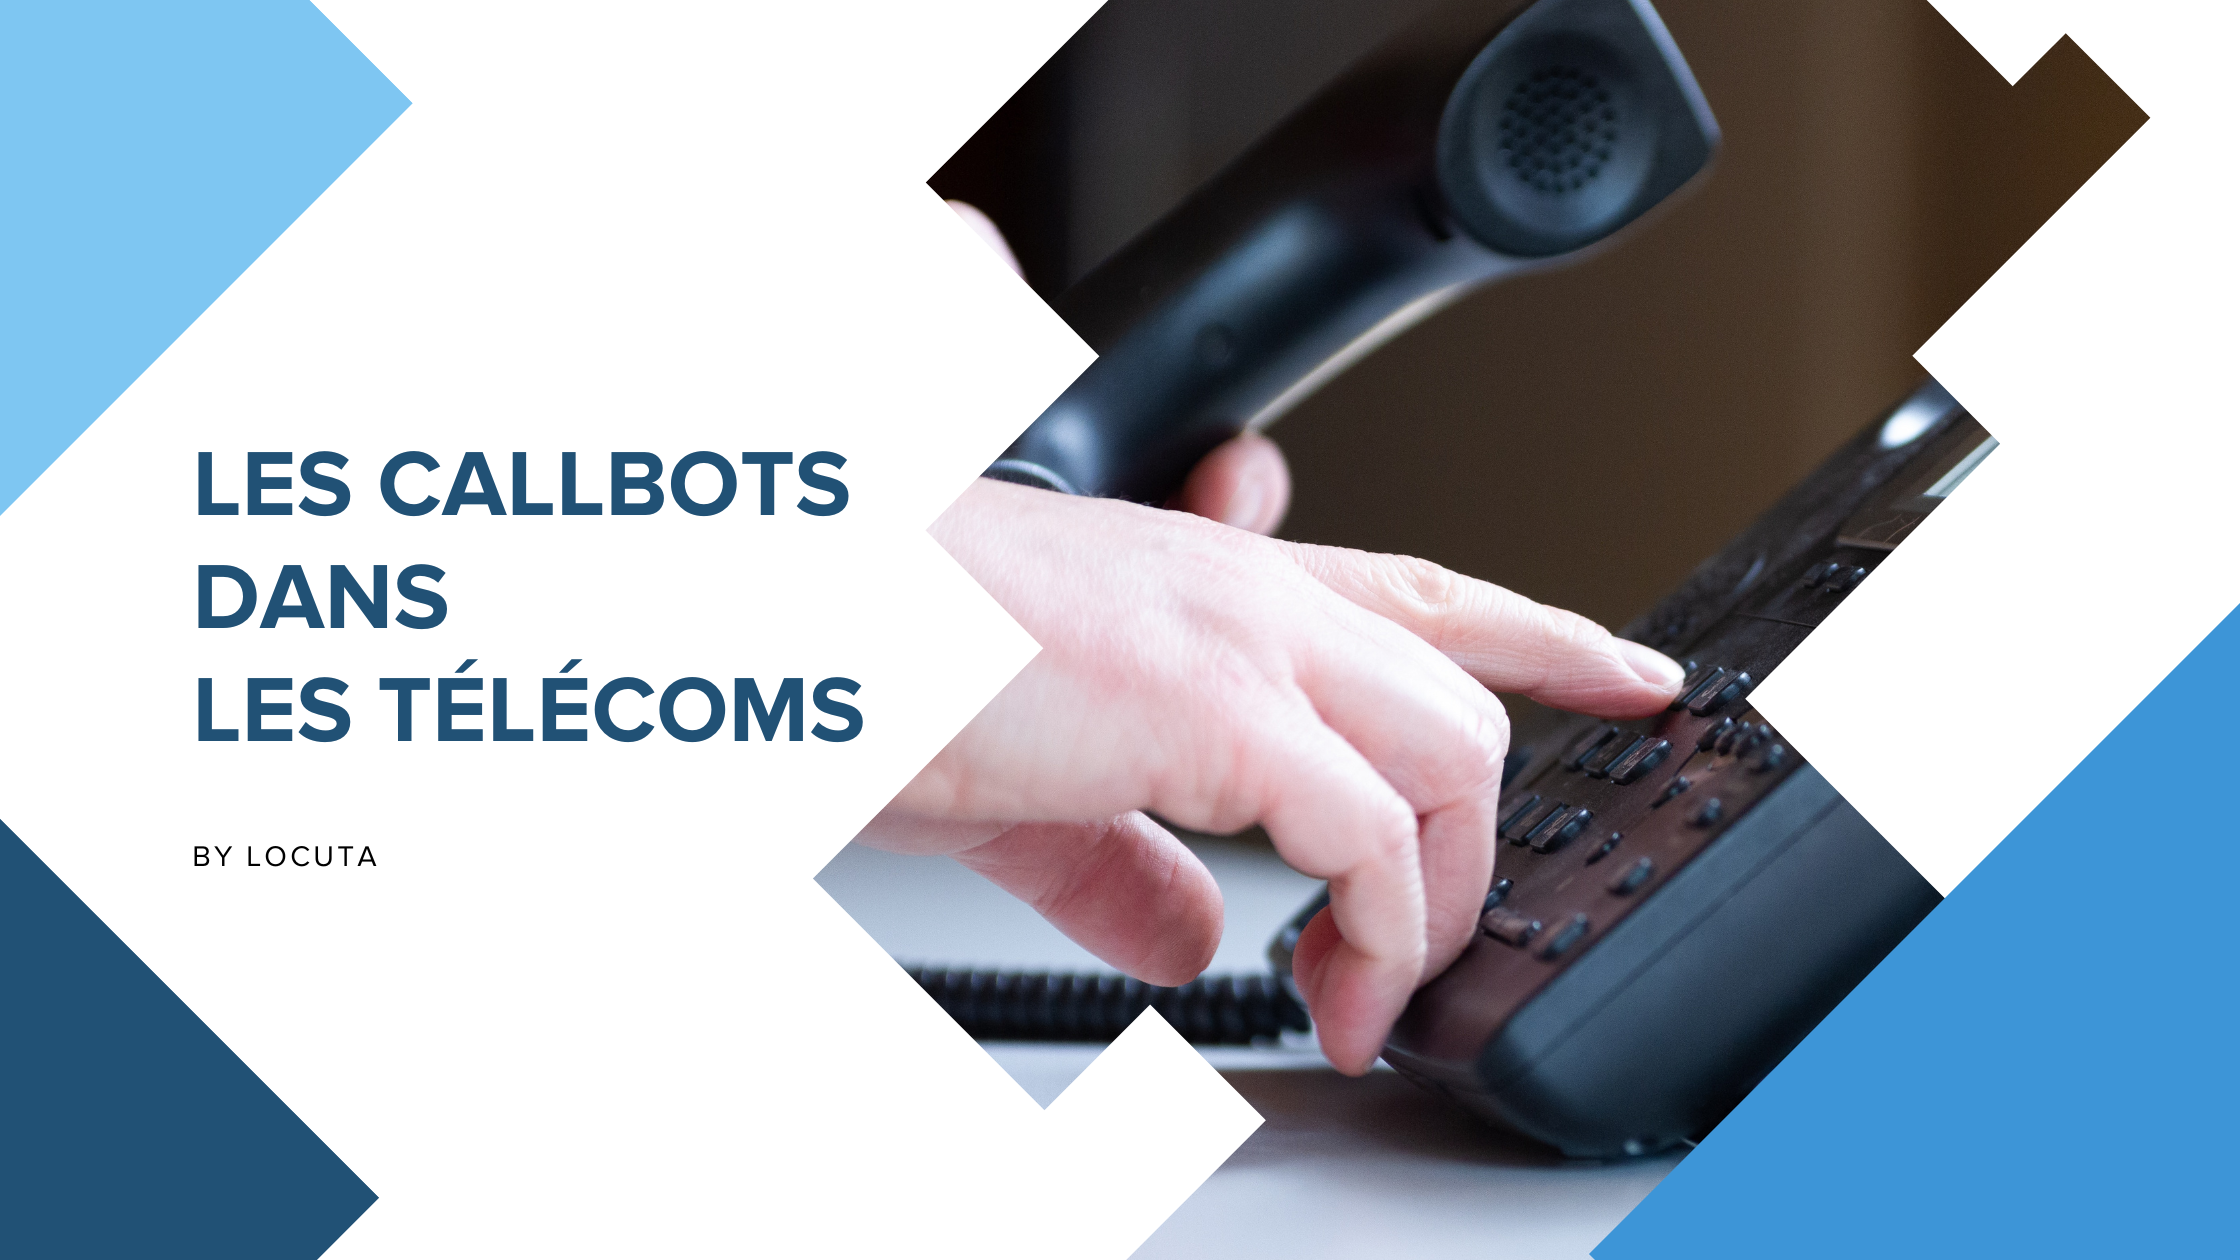 Callbots in telecoms